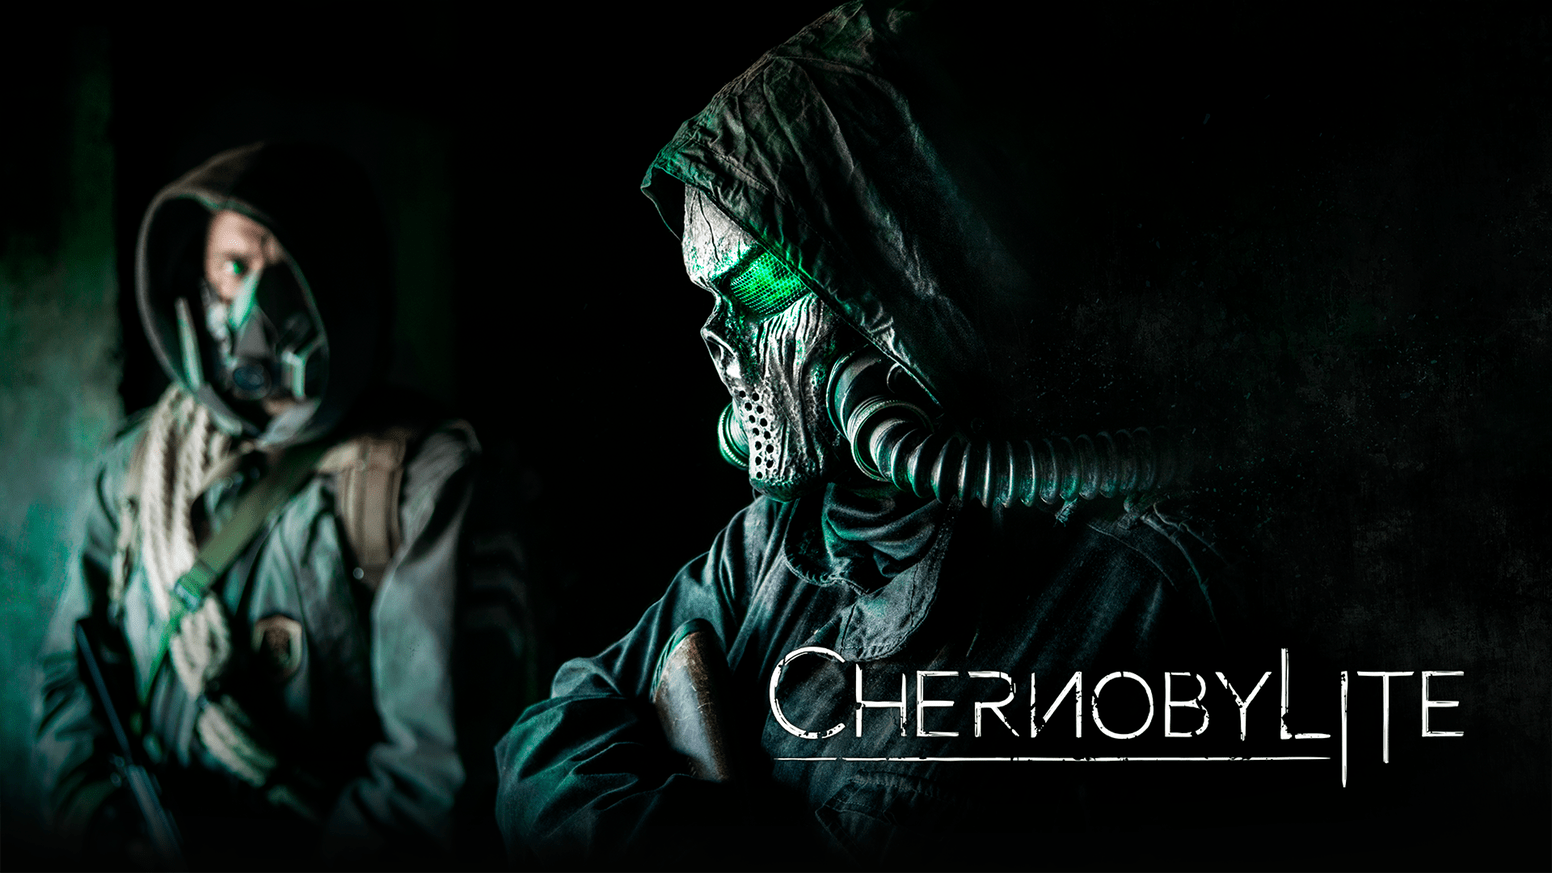 New Survival-Horror Game Chernobylite Will Let You Explore The Infamous Exclusion Zone, If You Dare